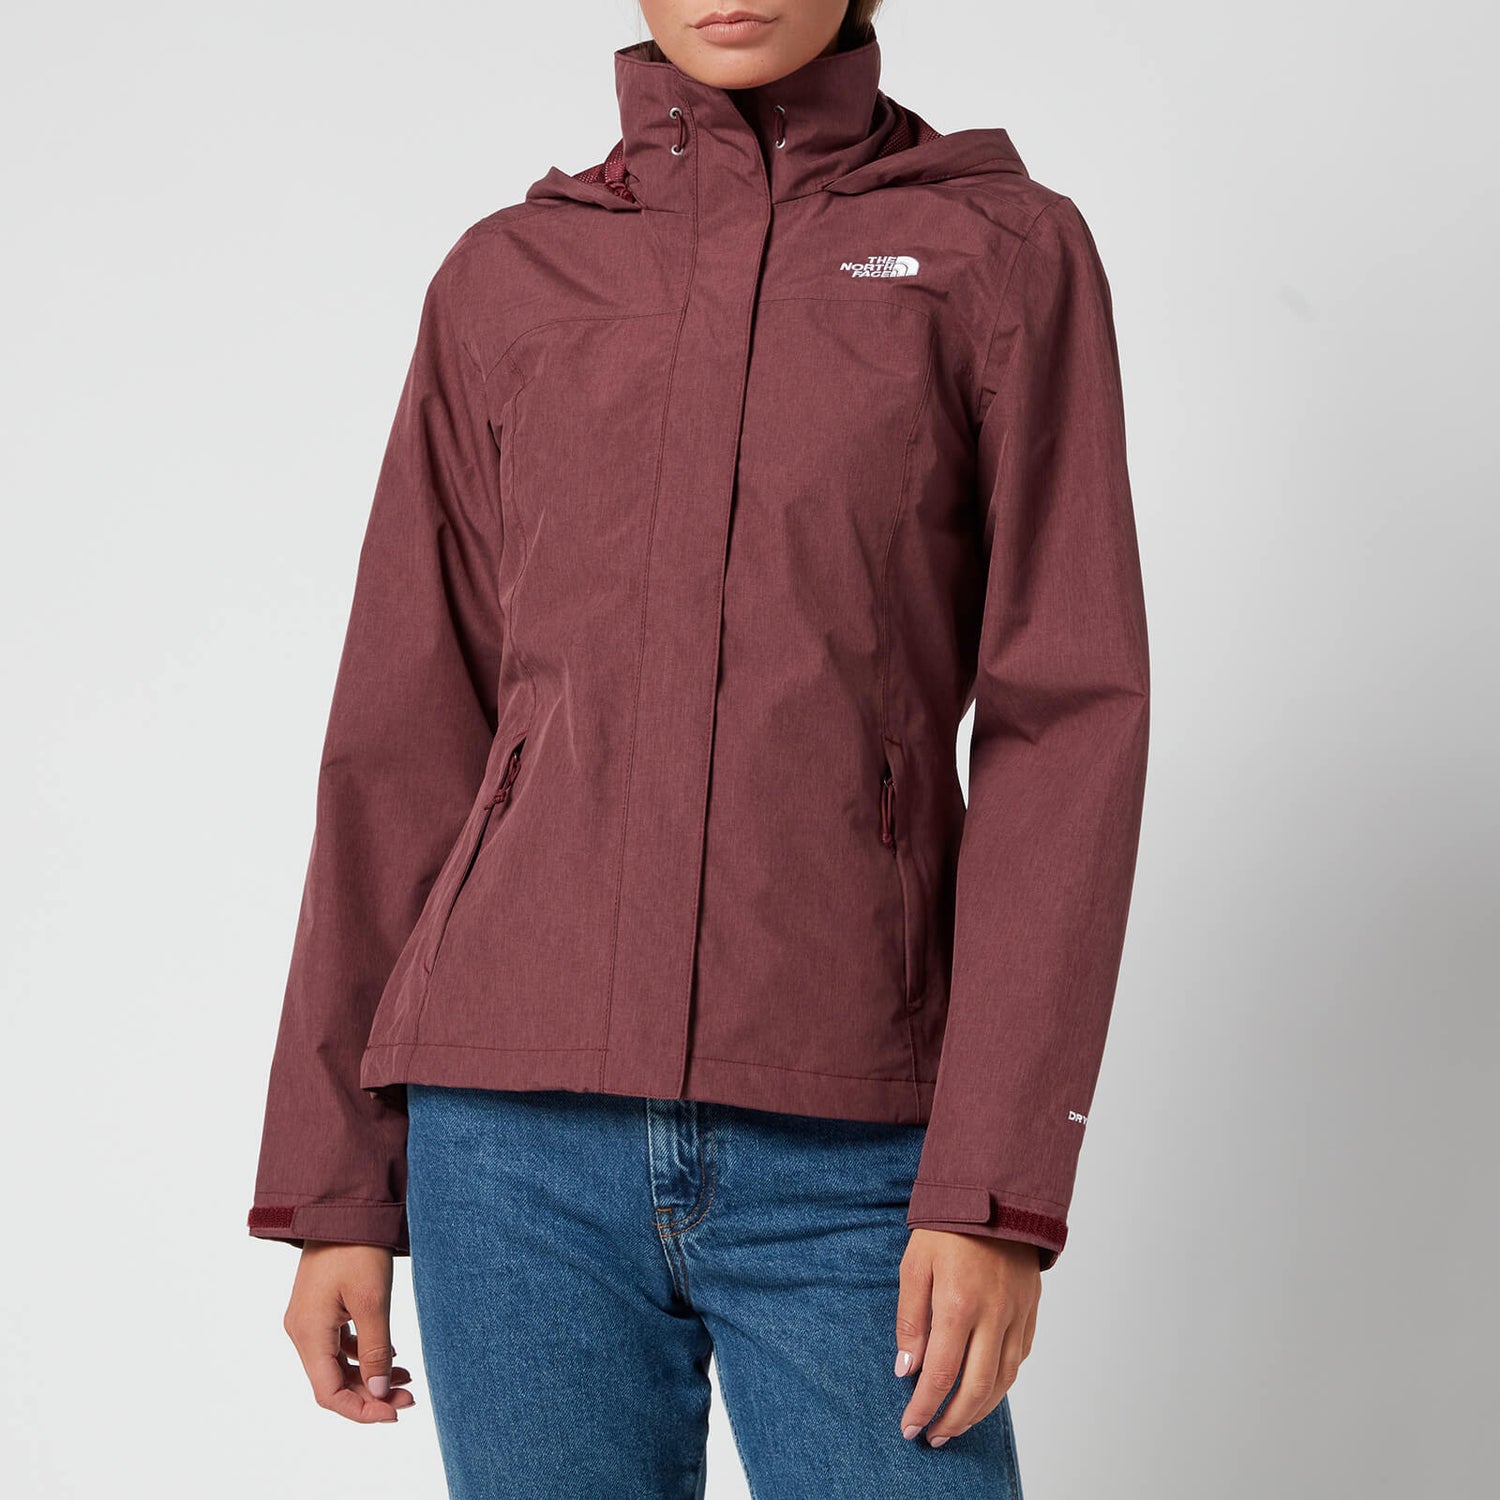 The North Face Women's Sangro Jacket - Red - XS